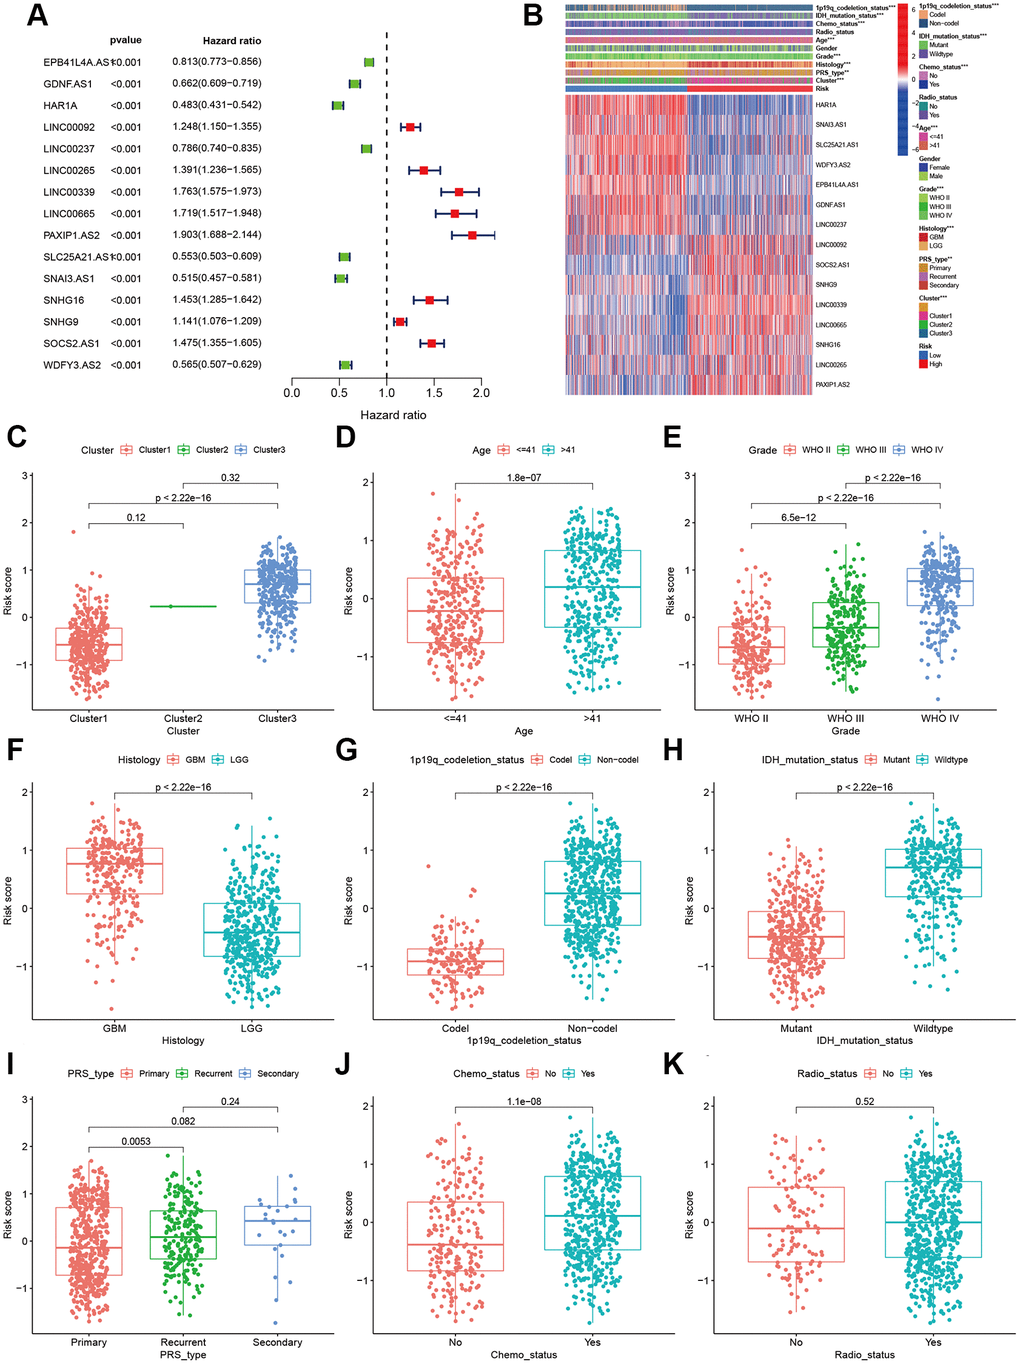 Correlations of clinical characteristic with identified aging-related lncRNAs signature. (A) Forest of univariate COX regression for 15 signature lncRNAs. (B) Heatmap showed that correlation of clinical parameters with risk scores and expression of 15 lncRNAs in high- and low-risk group. Boxplot showed the comparisons of risk score in different subgroups: (C) Cluster1 vs. Cluster2 vs. Cluster3. (D) age ≤41 vs. >41, (E) WHO II vs. WHO III vs. WHOIV. (F) GBM vs. LGG, (G) 1p19q